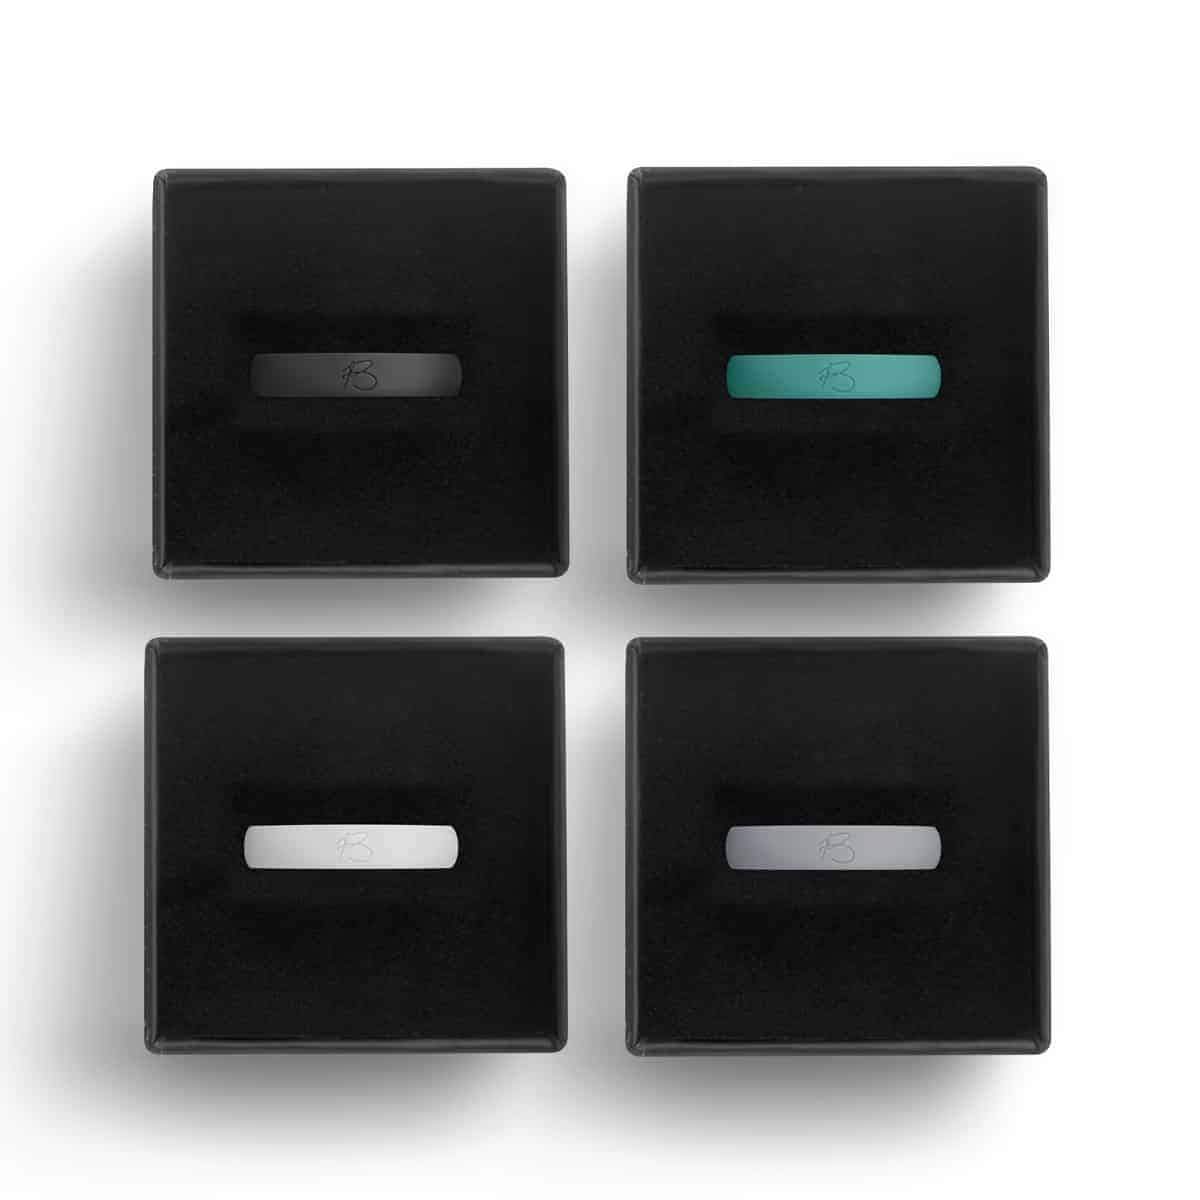 botthms botthms Ladies Silicone Rings Combo Pack - 4 white/grey/black/teal Silicone Rings